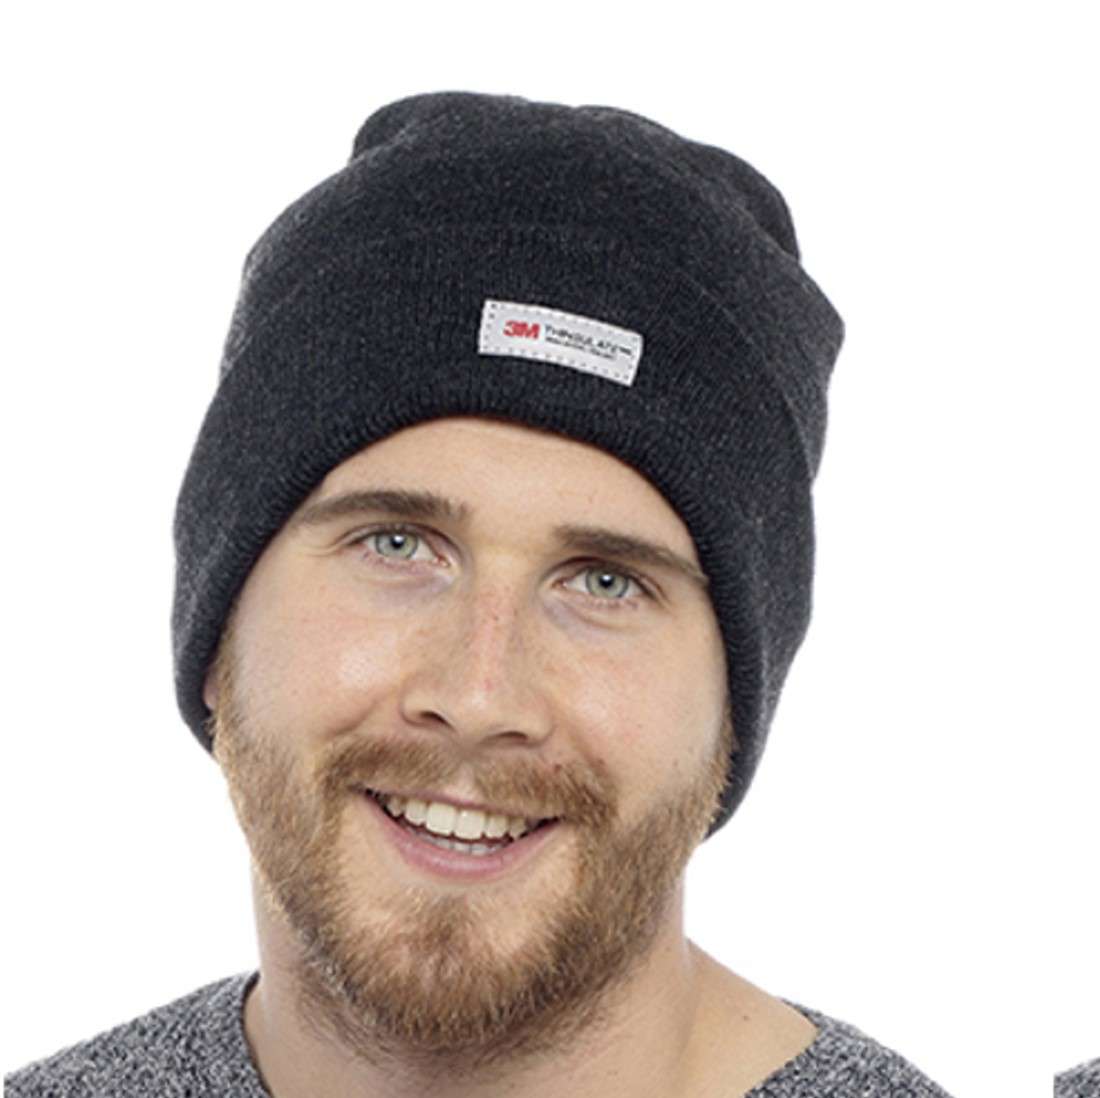 Mens 3M Thinsulate Thermal Winter Hat - Choose Either Grey or Black